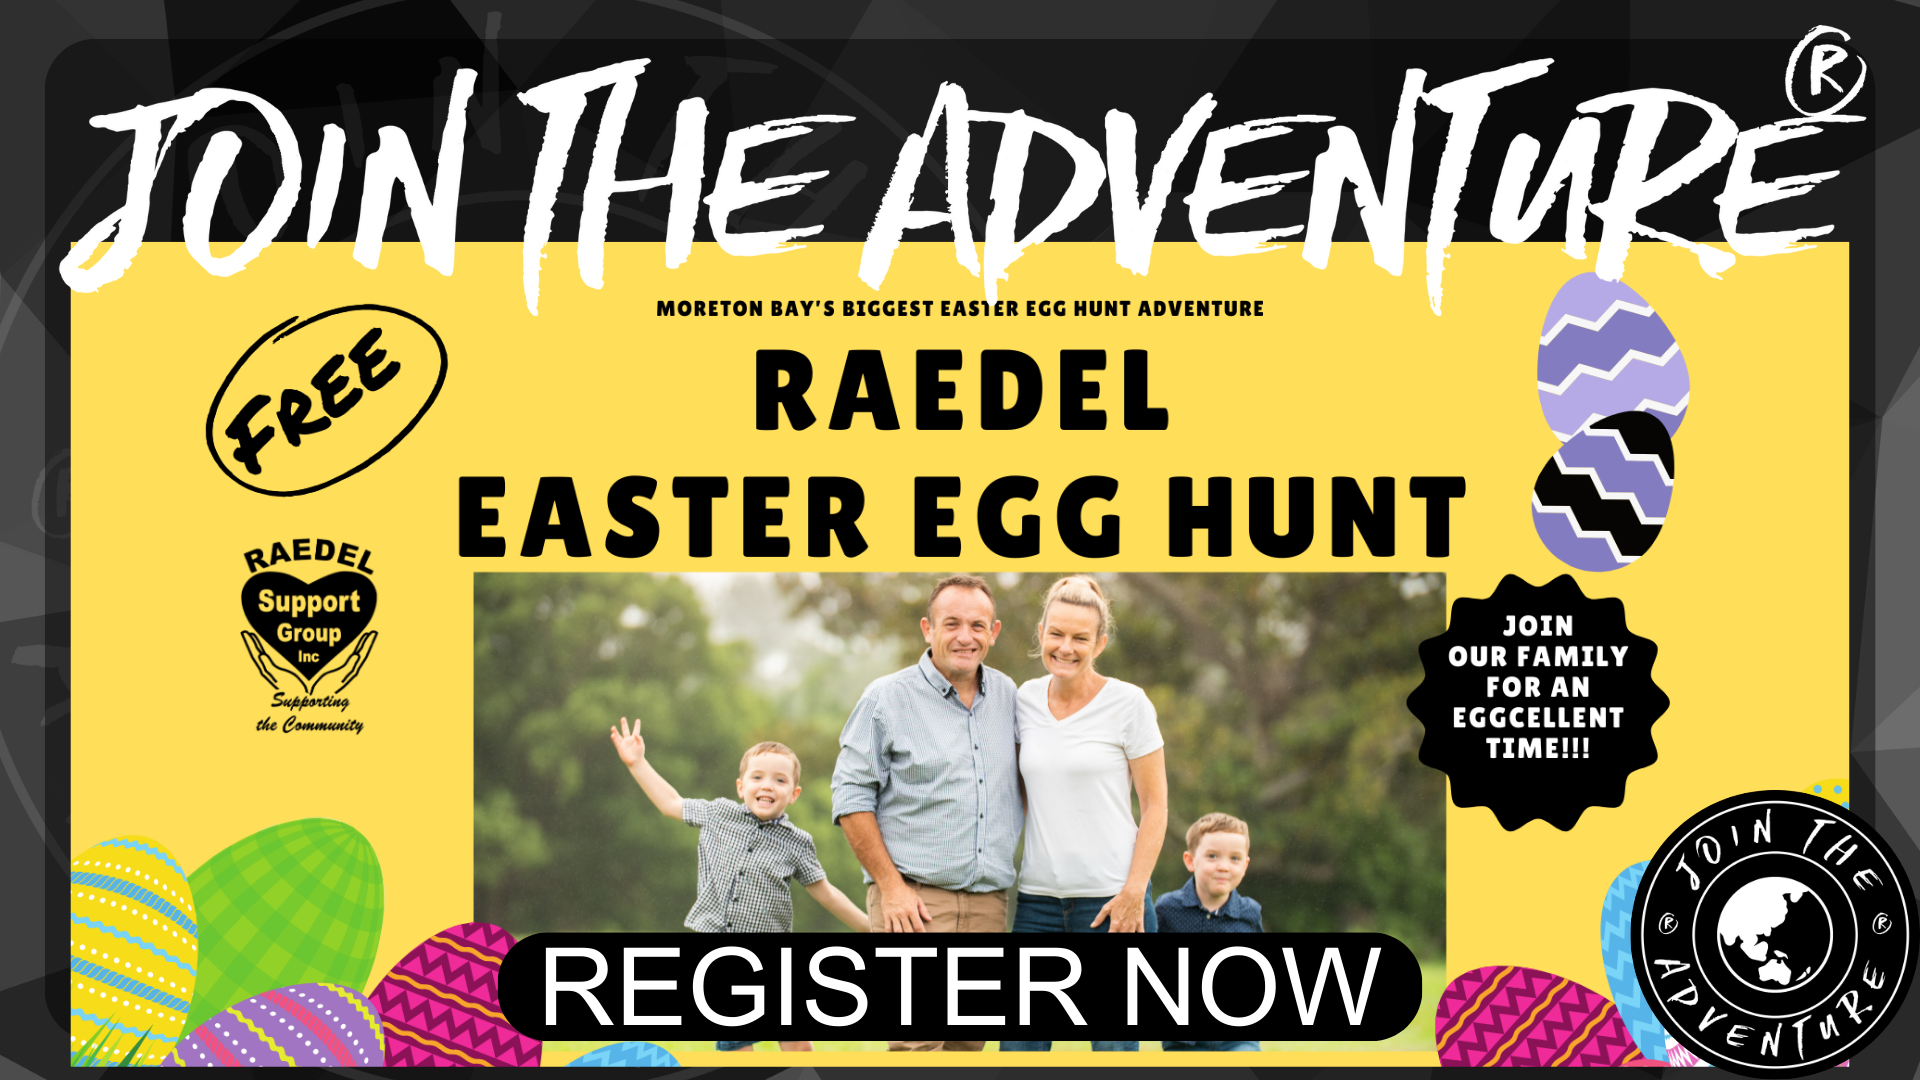 The Raedel Family Continues Tradition with 14th Annual Easter Egg Hunt Extravaganza in Moreton Bay